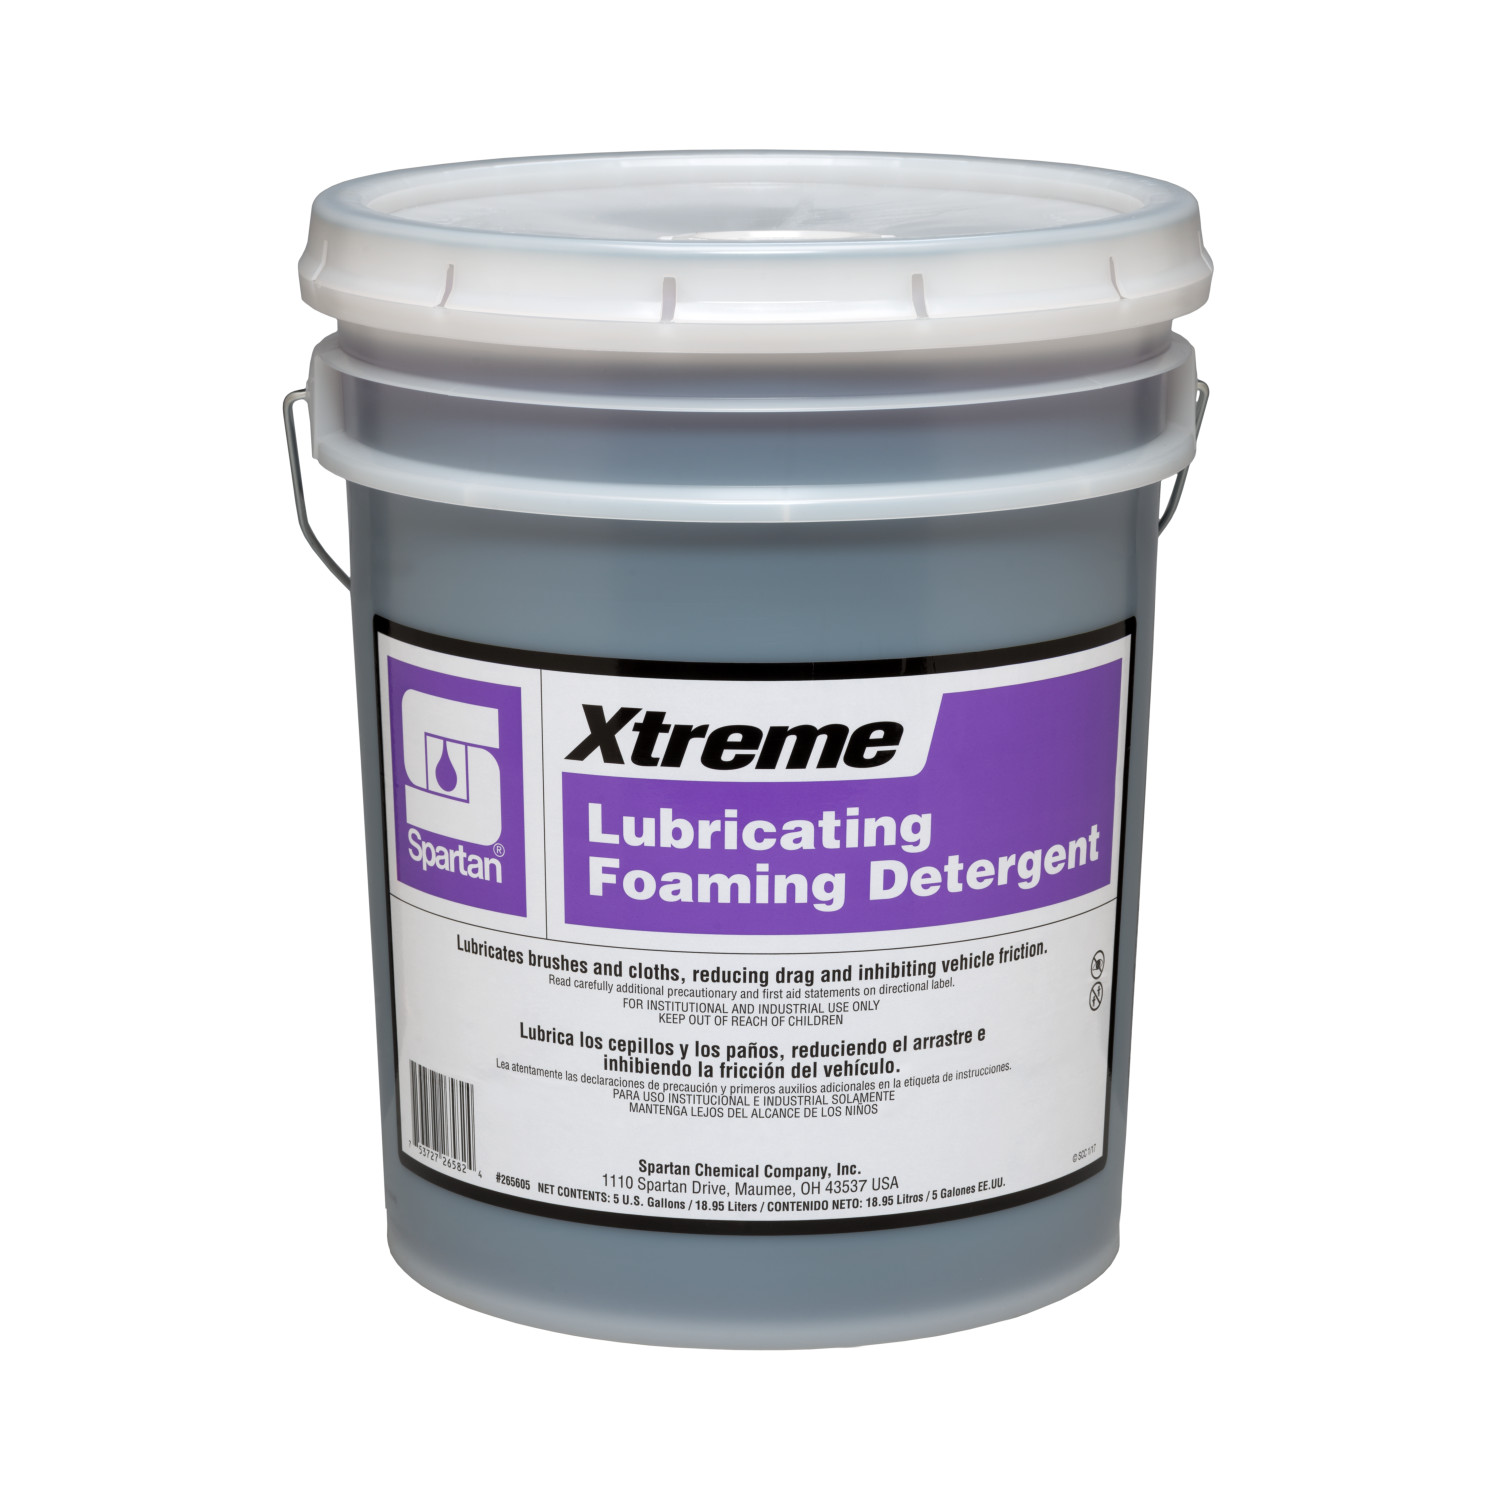 Xtreme® Lubricating Foaming Detergent 5 gallon pail